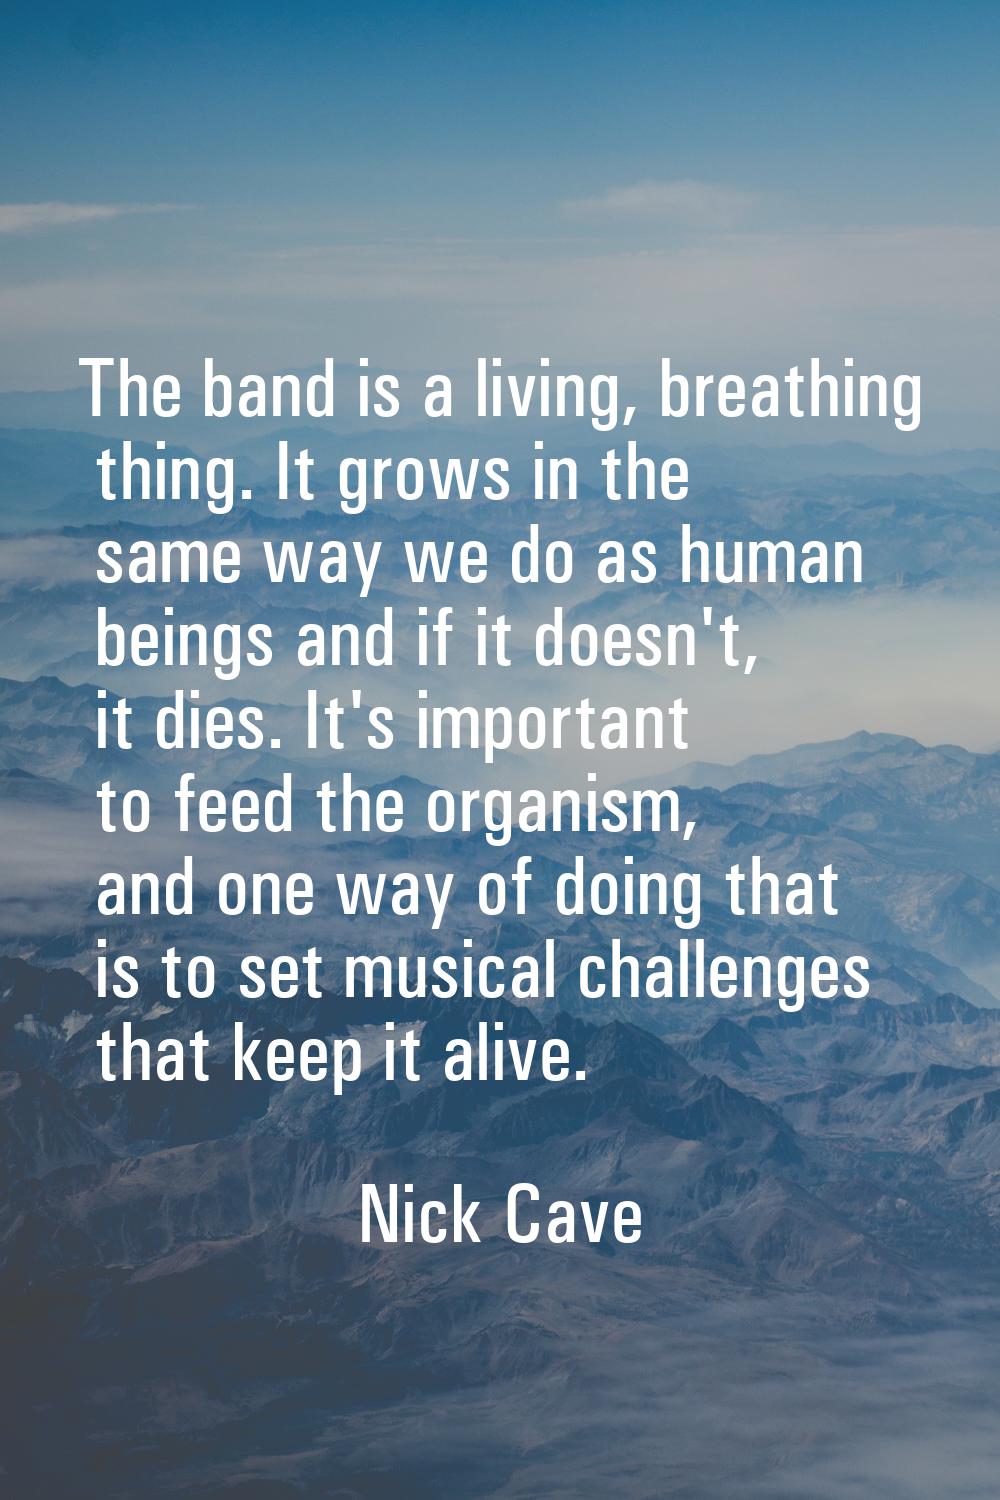 The band is a living, breathing thing. It grows in the same way we do as human beings and if it doe